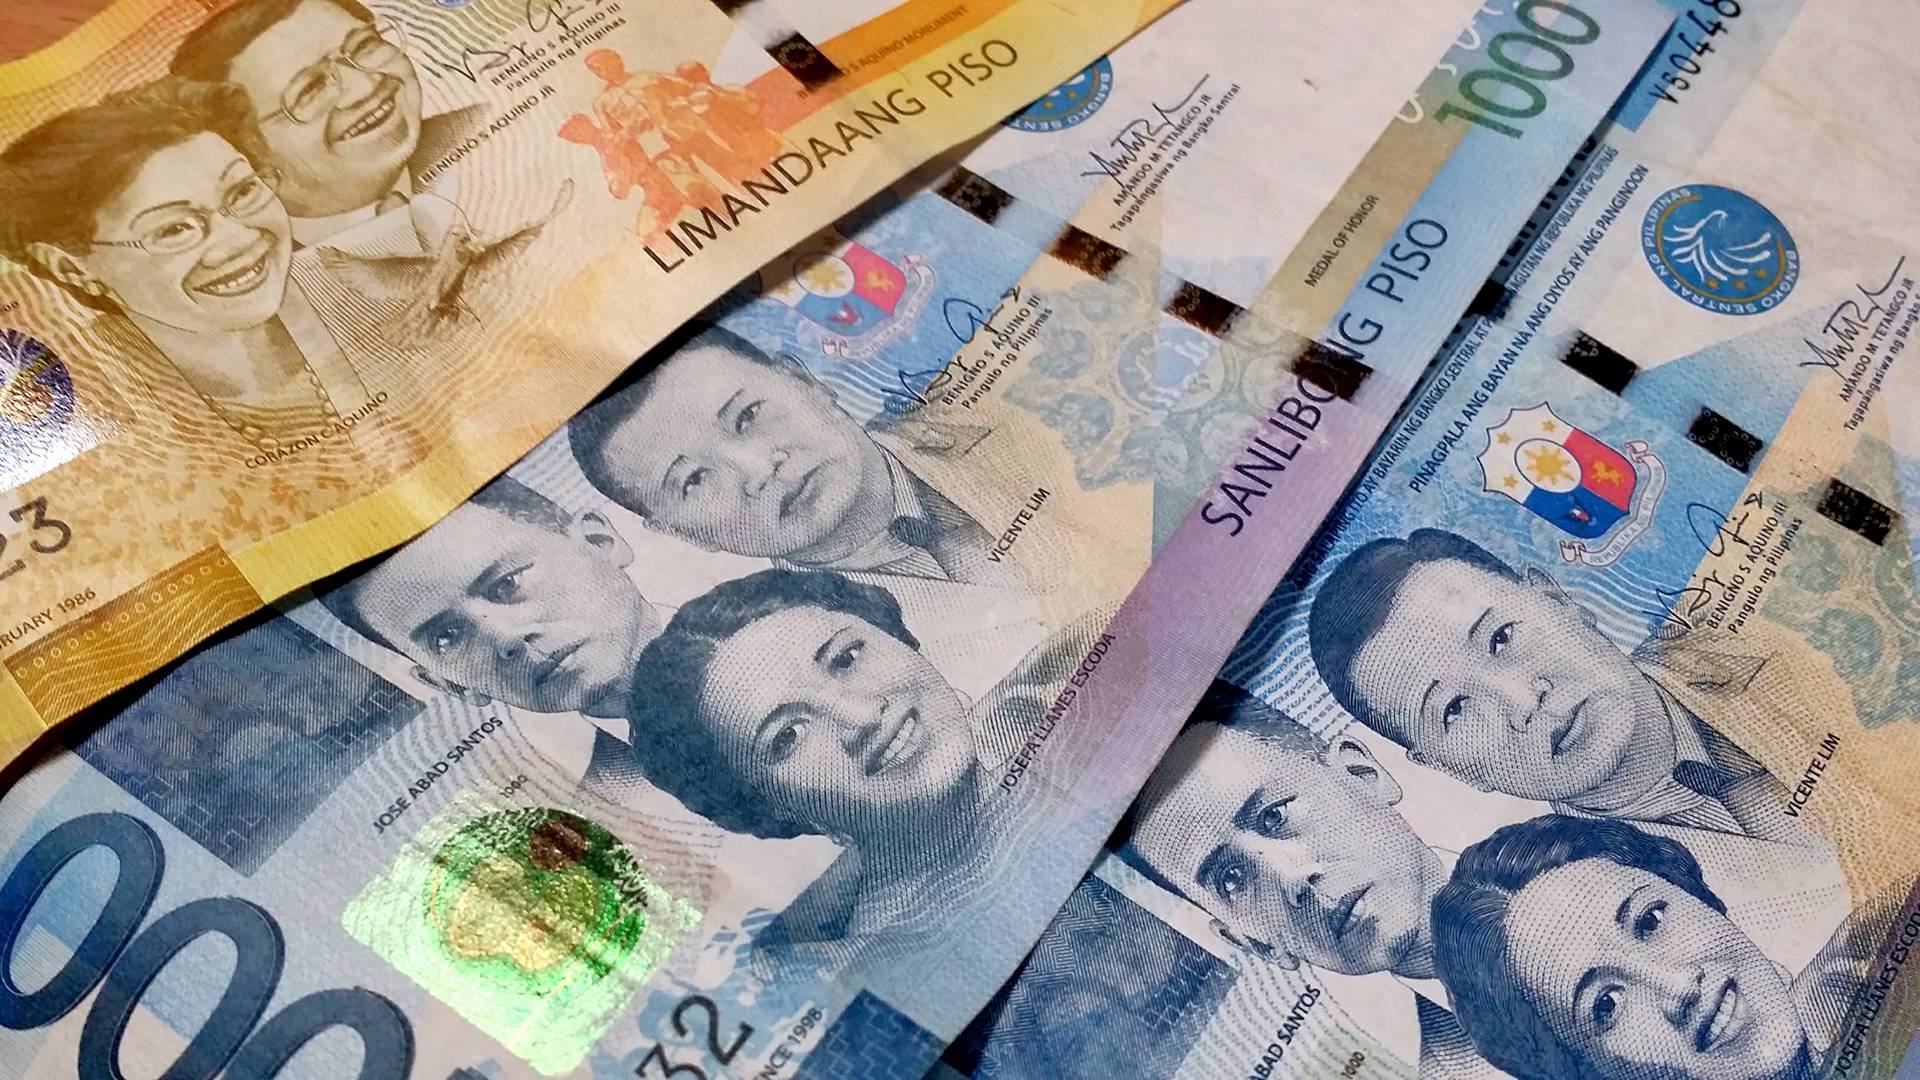 Forex canadian dollar to philippines peso